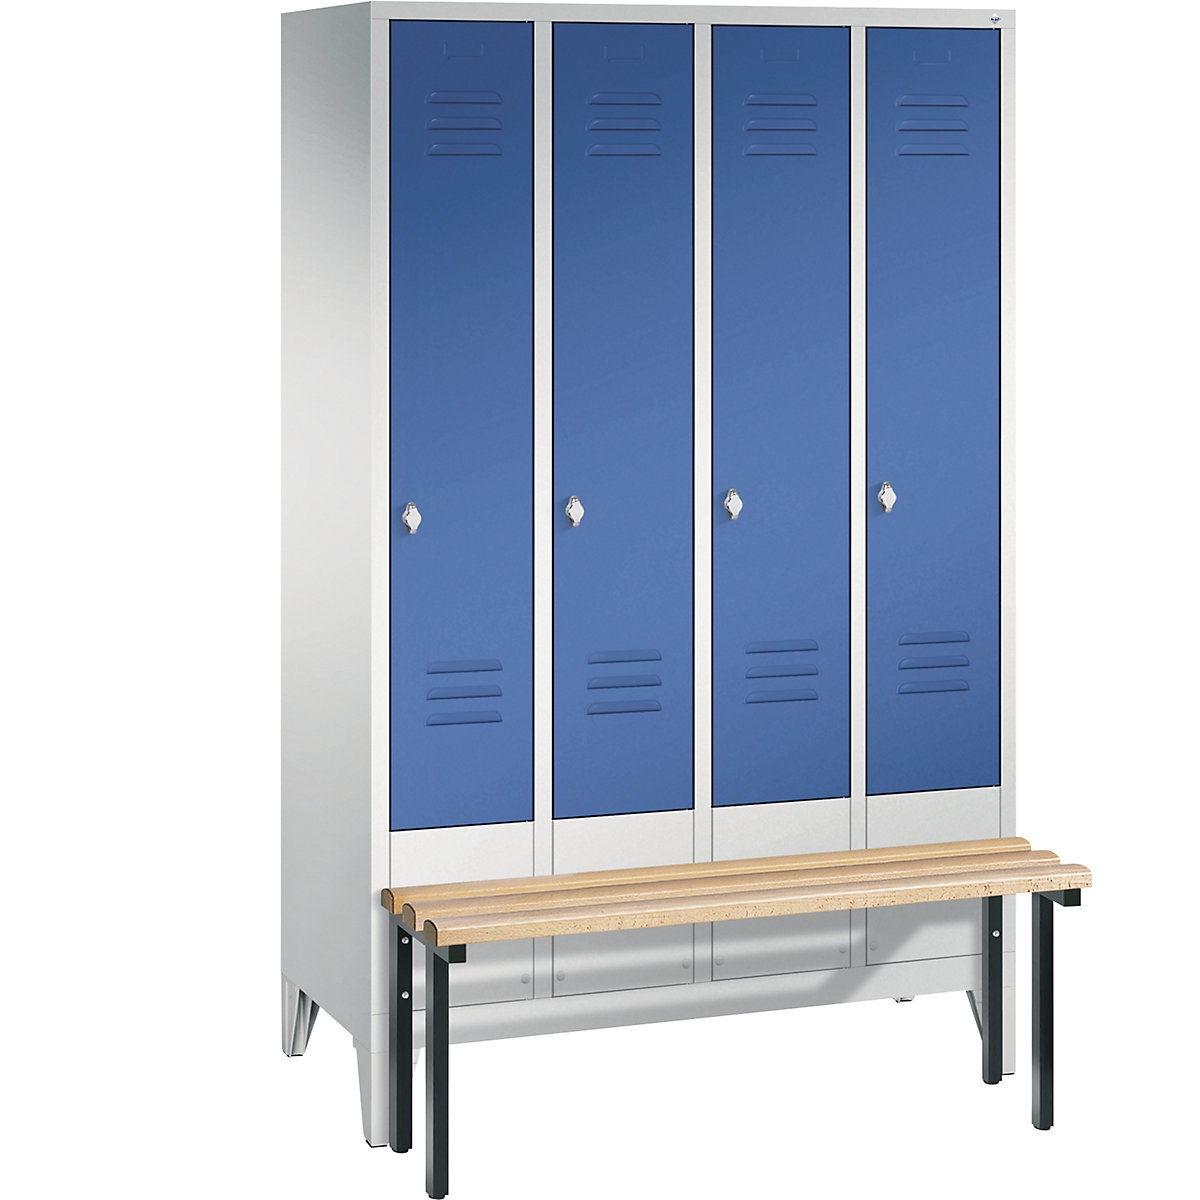 CLASSIC cloakroom locker with bench mounted in front – C+P, 4 compartments, compartment width 300 mm, light grey / gentian blue-5